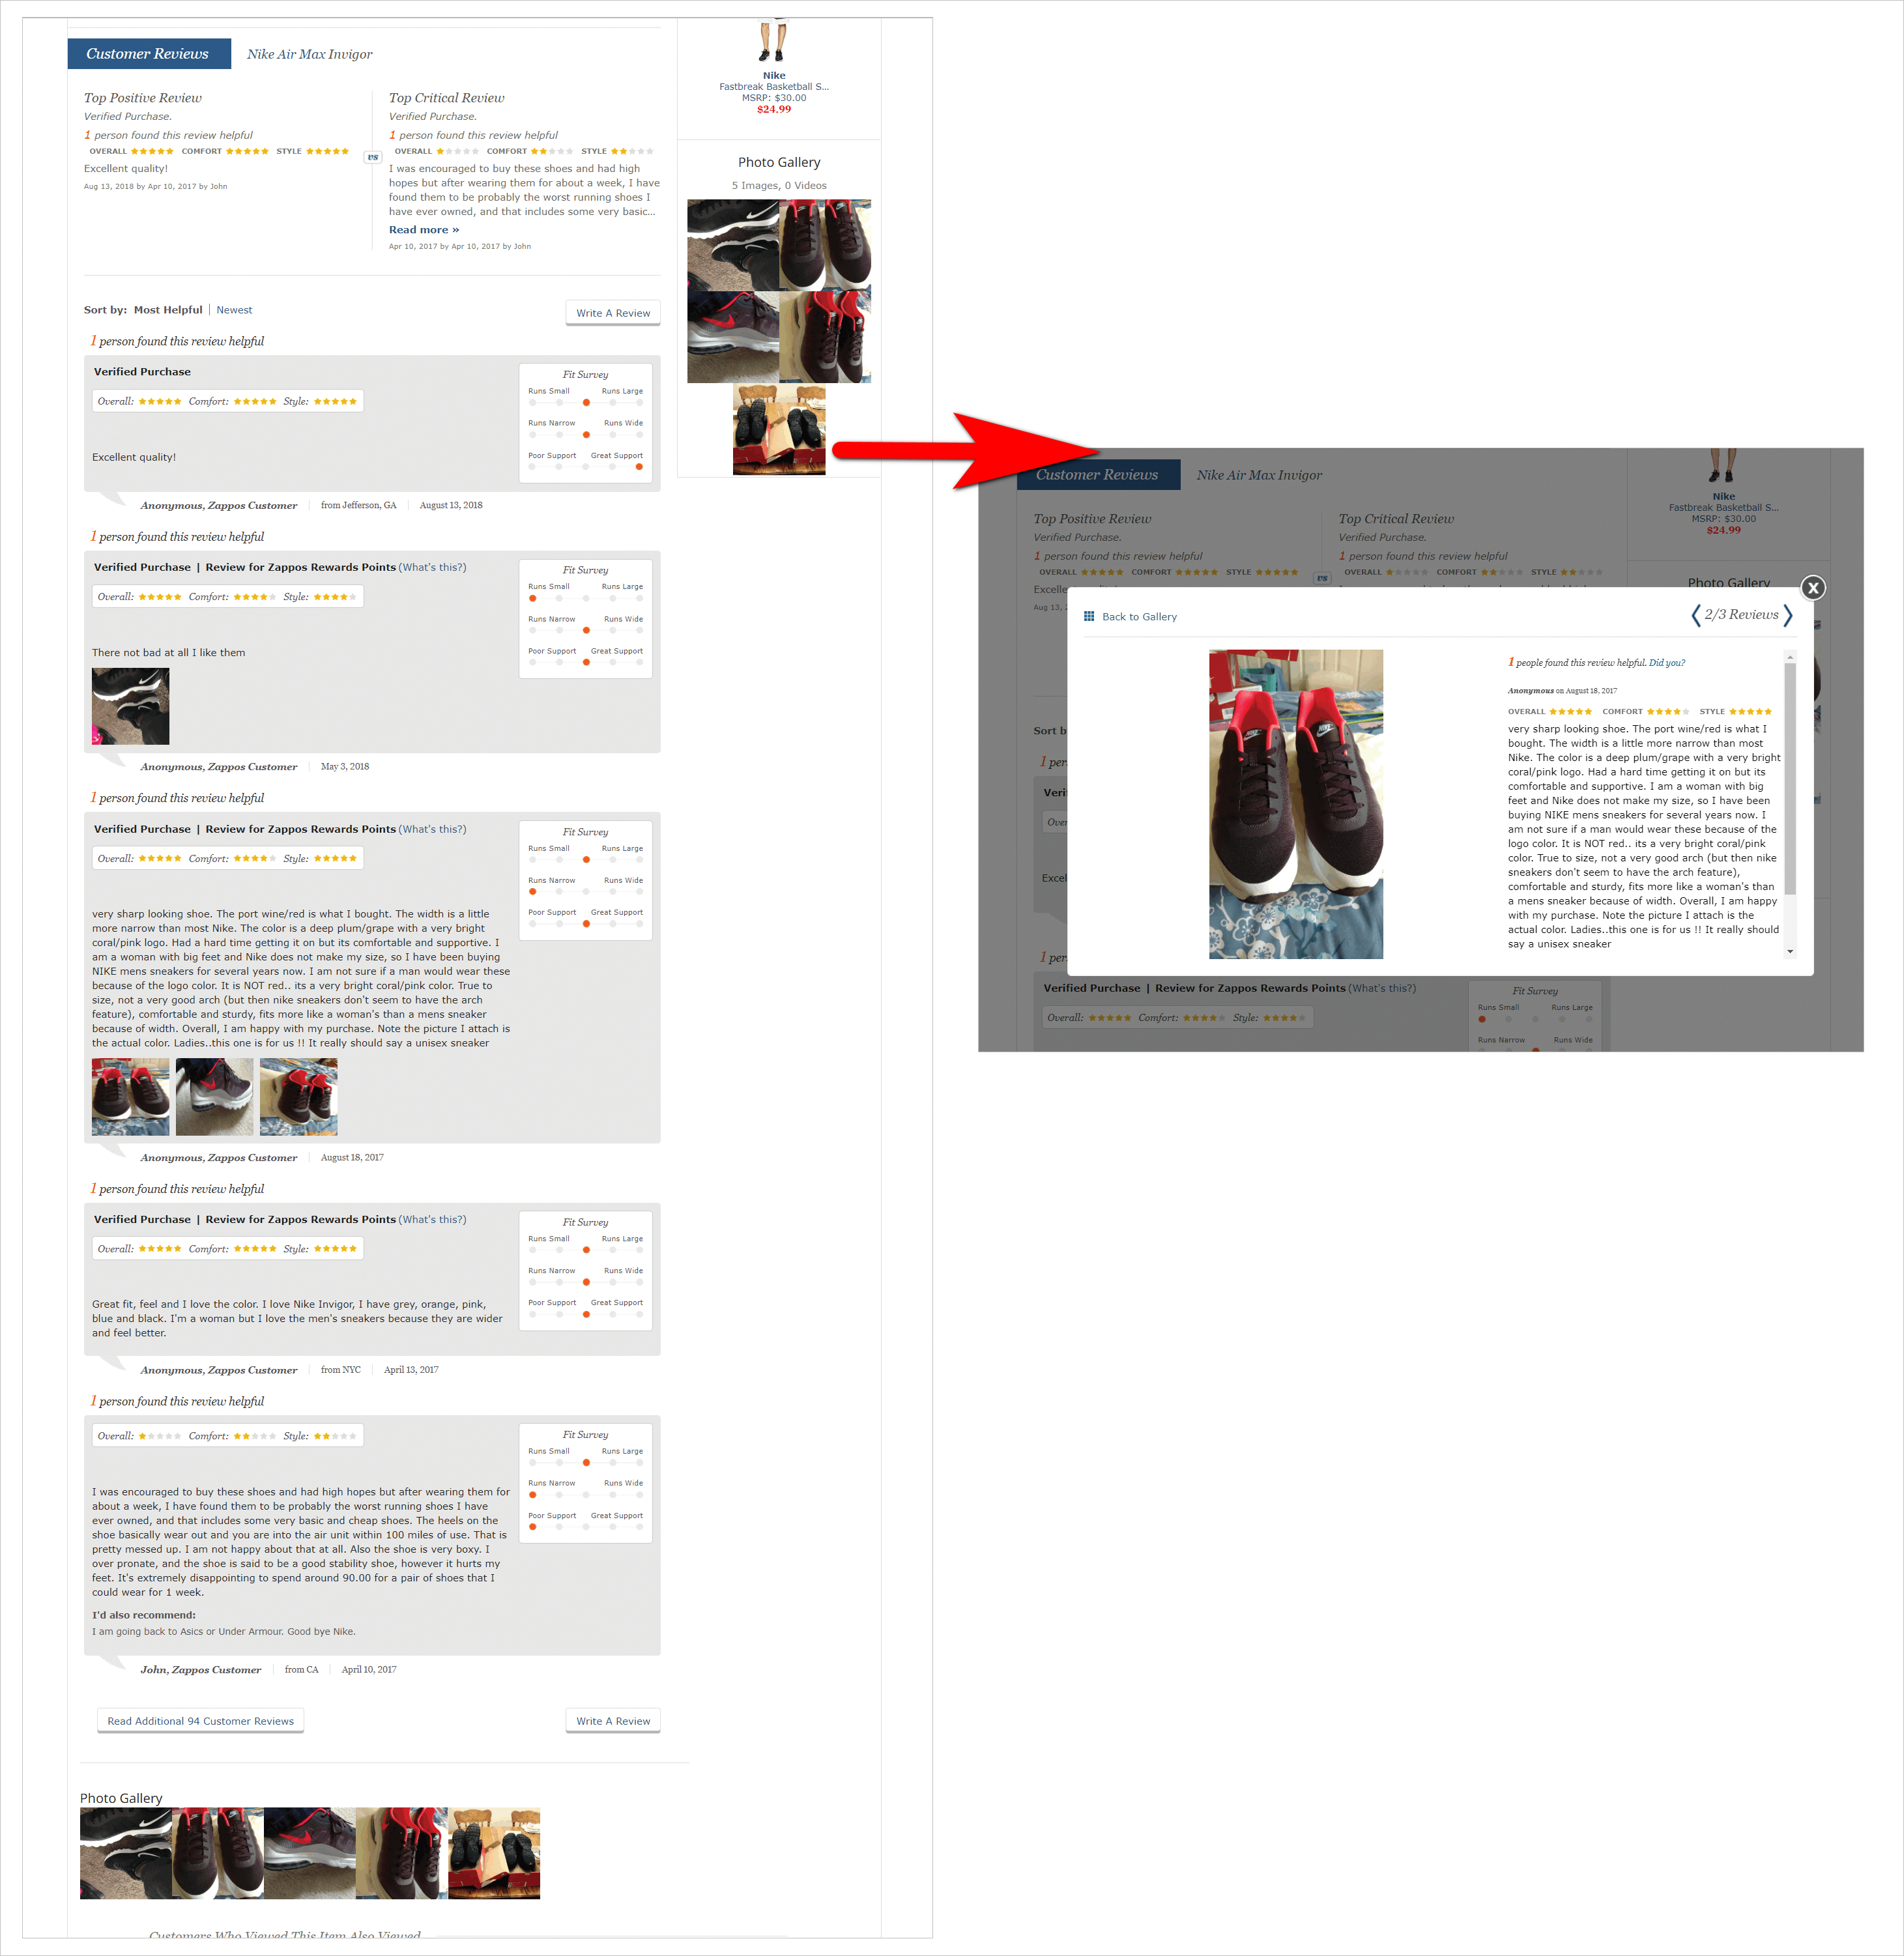 Customer reviews on Zappos.com product detail page with user-submitted photo gallery at the top of the section. Beside it is the popover, that comes up when the user clicks on a photo, with an enlarged image and the customer's comments.